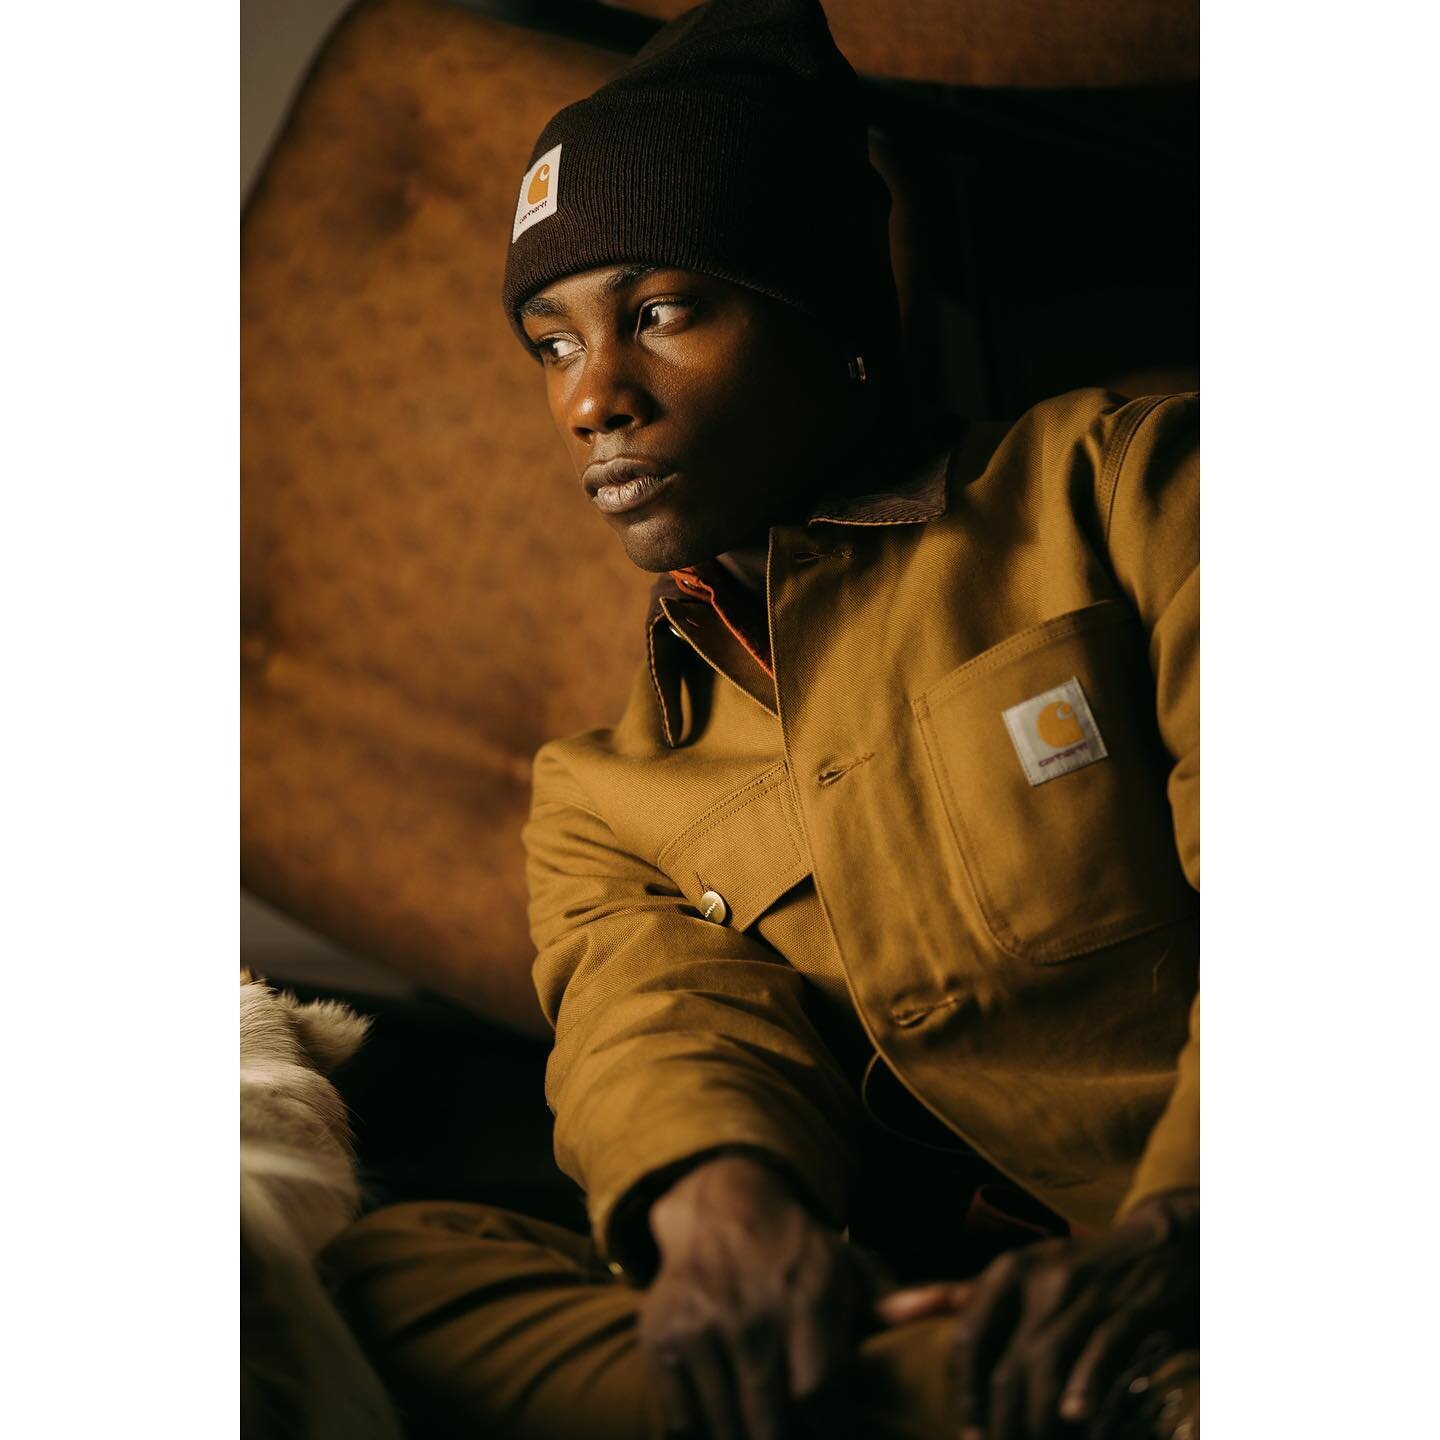 Highlighting more portraiture on our site like this series of @princevince18 in @carharttwip x @berkeleysupply